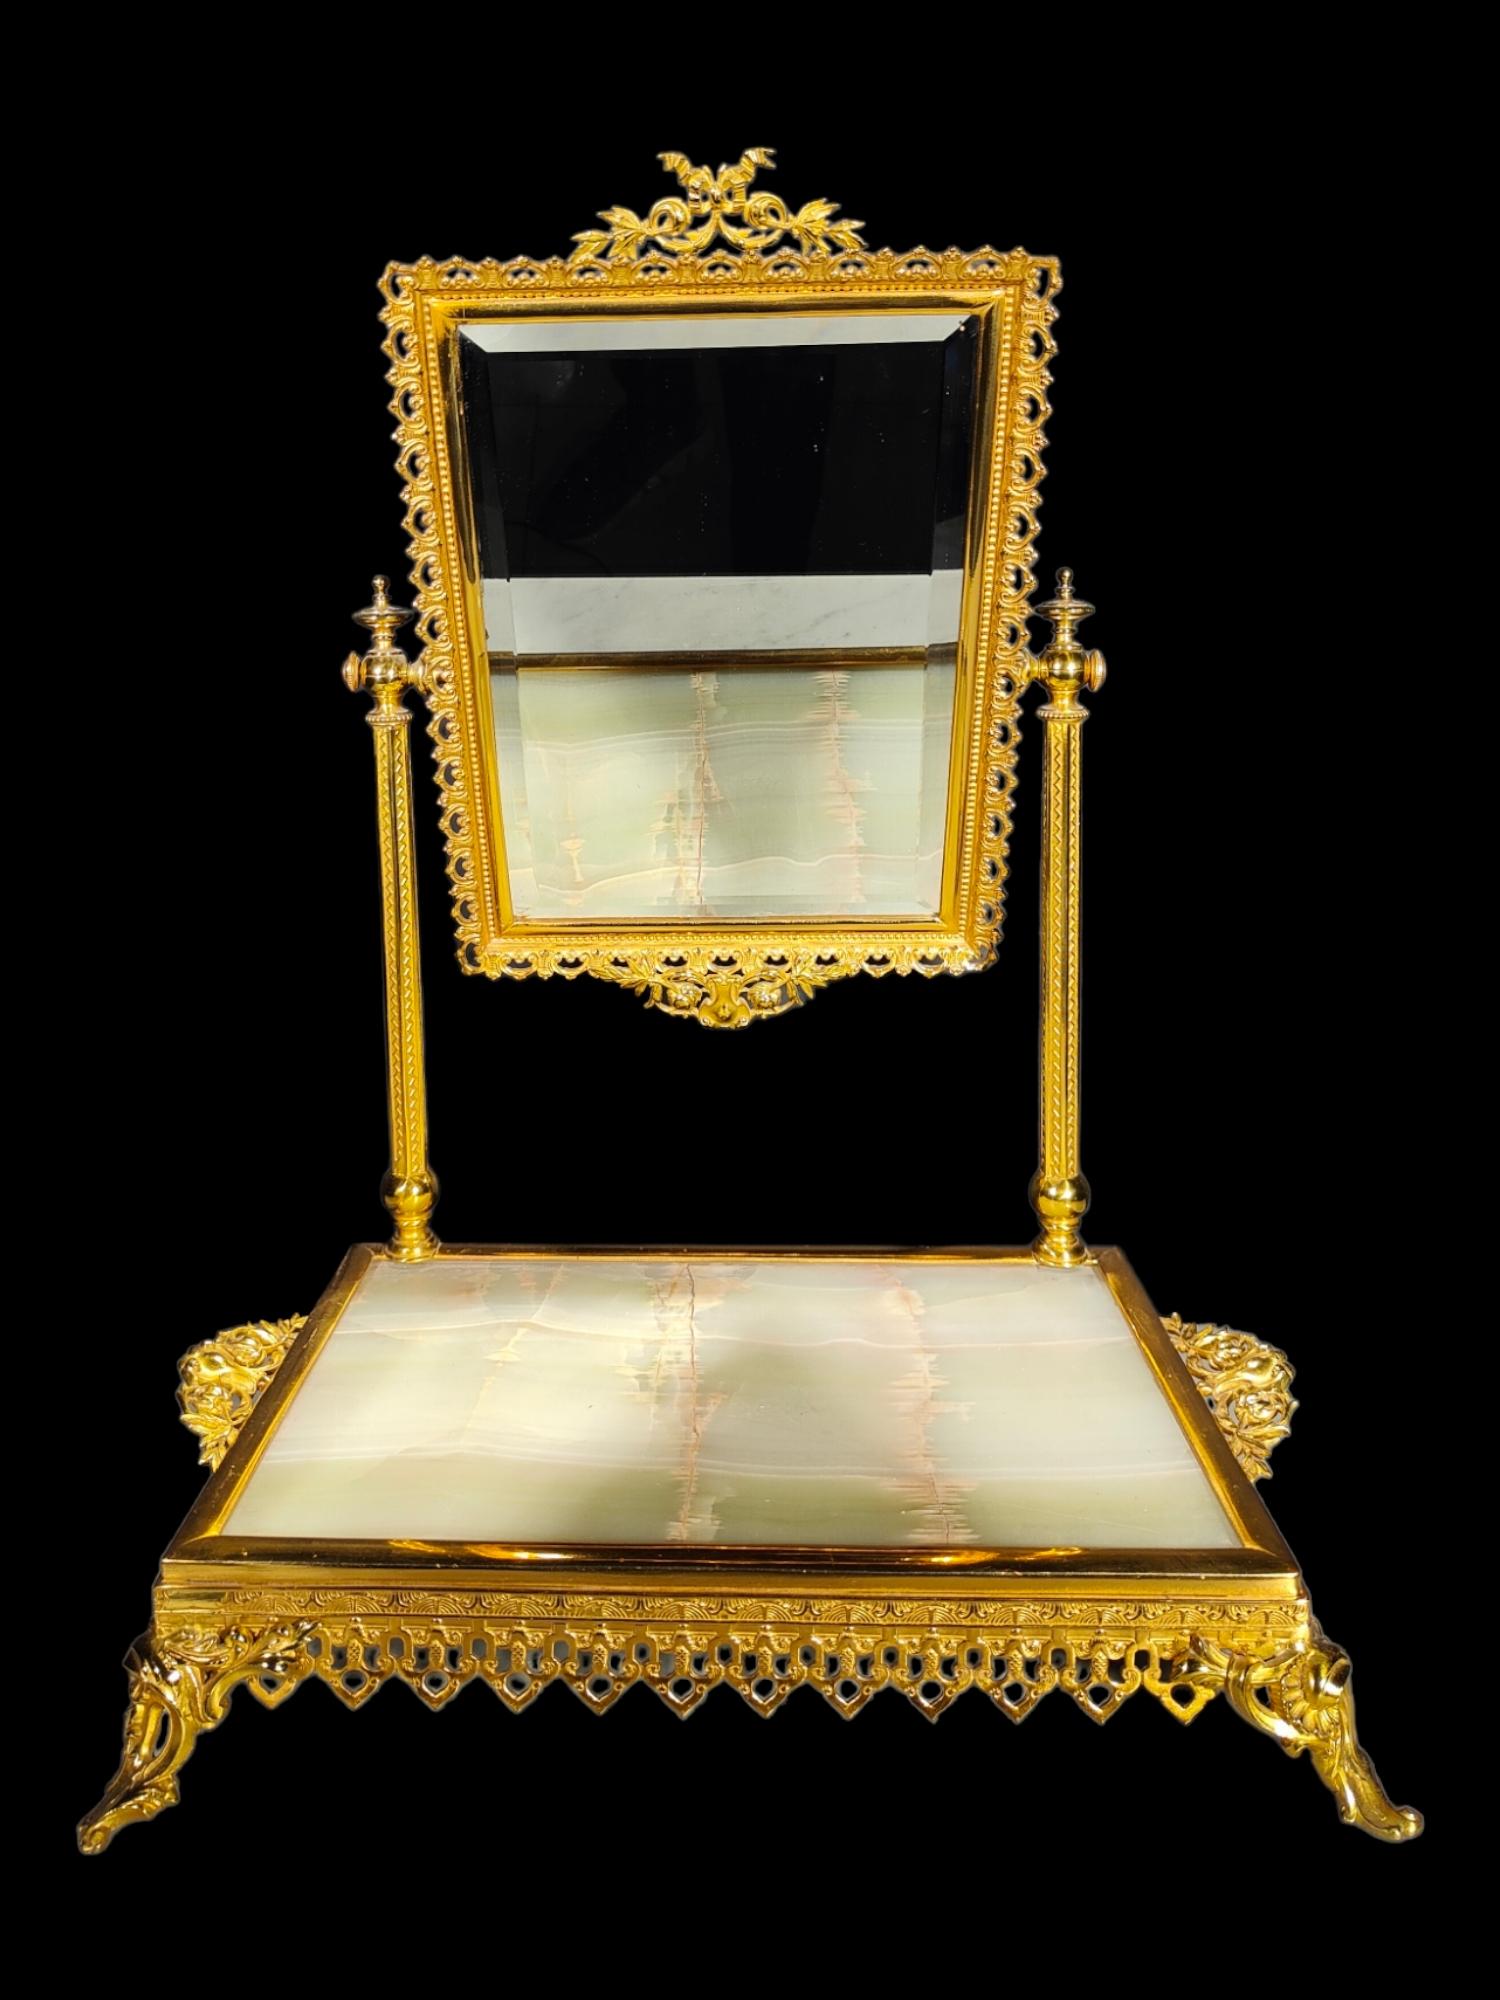 Elegant dressing table with table mirror 19th century
Very pretty jewelry box and lady's vanity in gold bronze and onyx from the 19th century. The bronze is sculpted with deometric patterns, the mirror is biclé and the onyx has a very nice vein.,